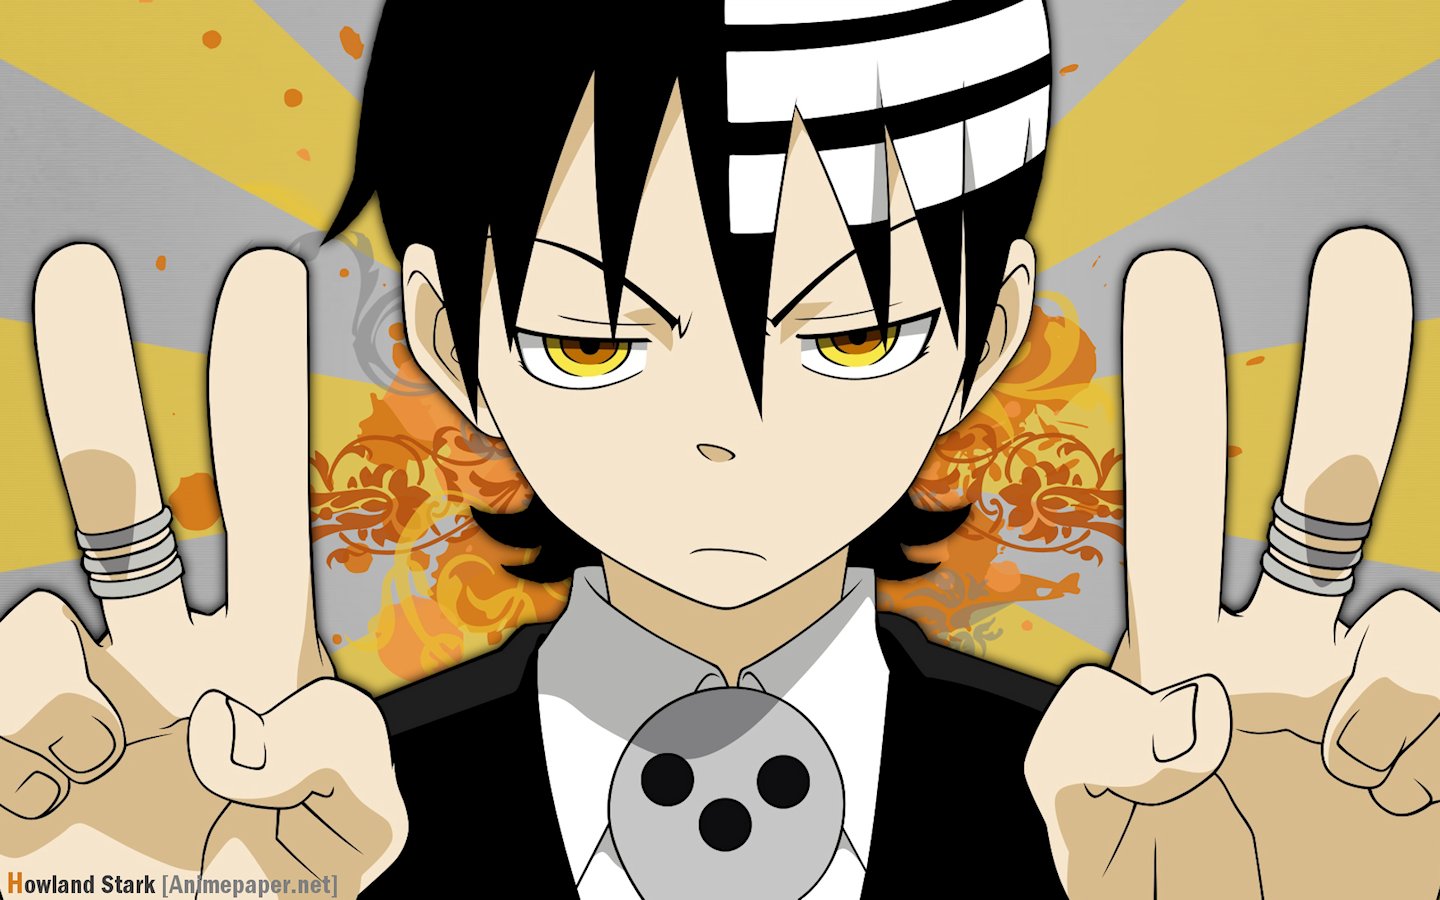 Soul Eater Backgrounds on Wallpapers Vista